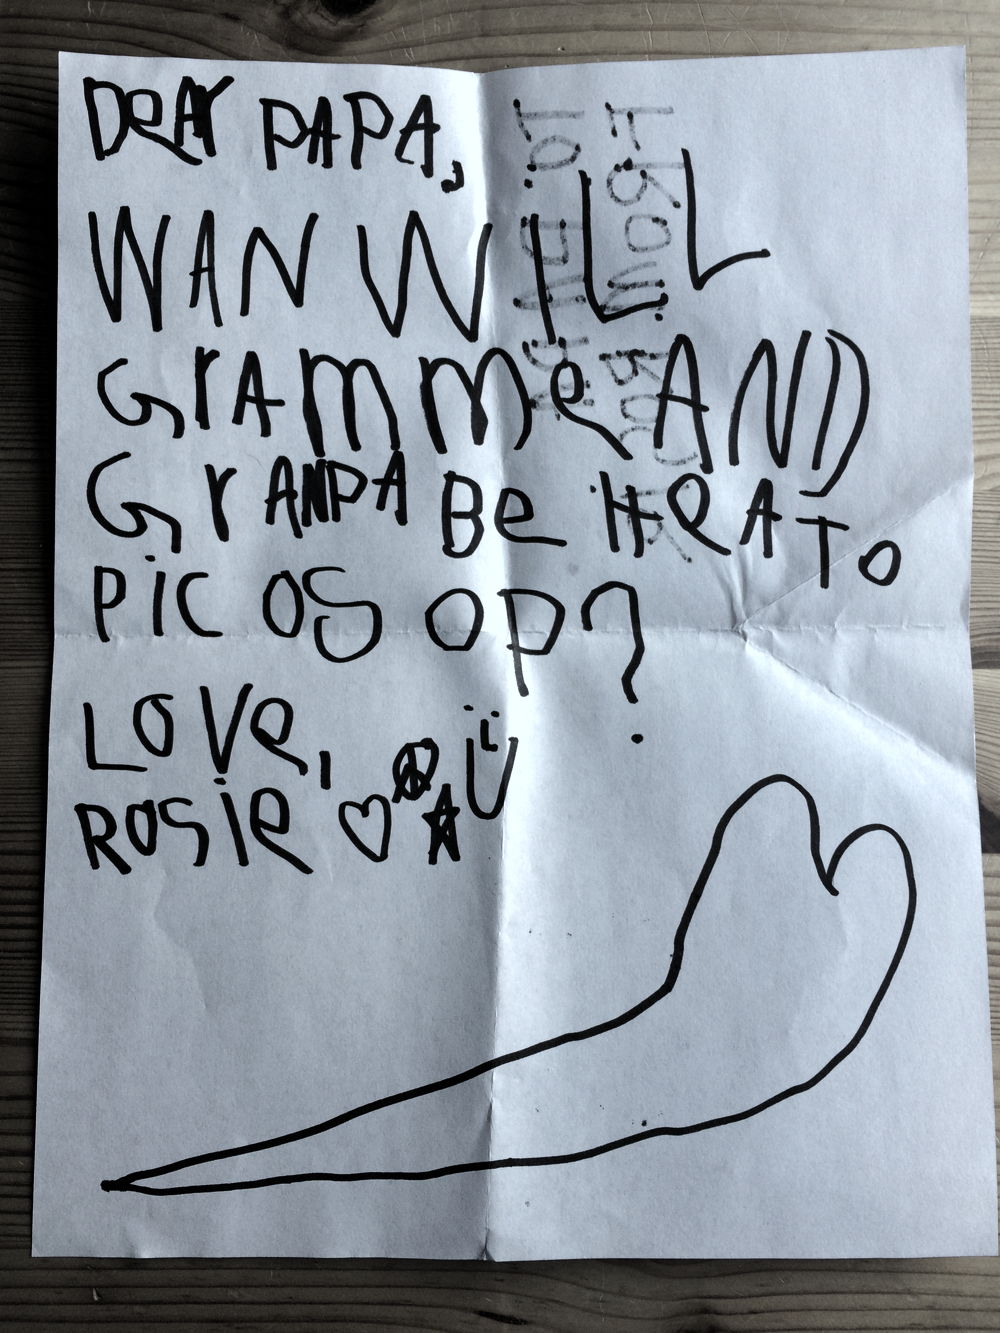 A note from Rosie.